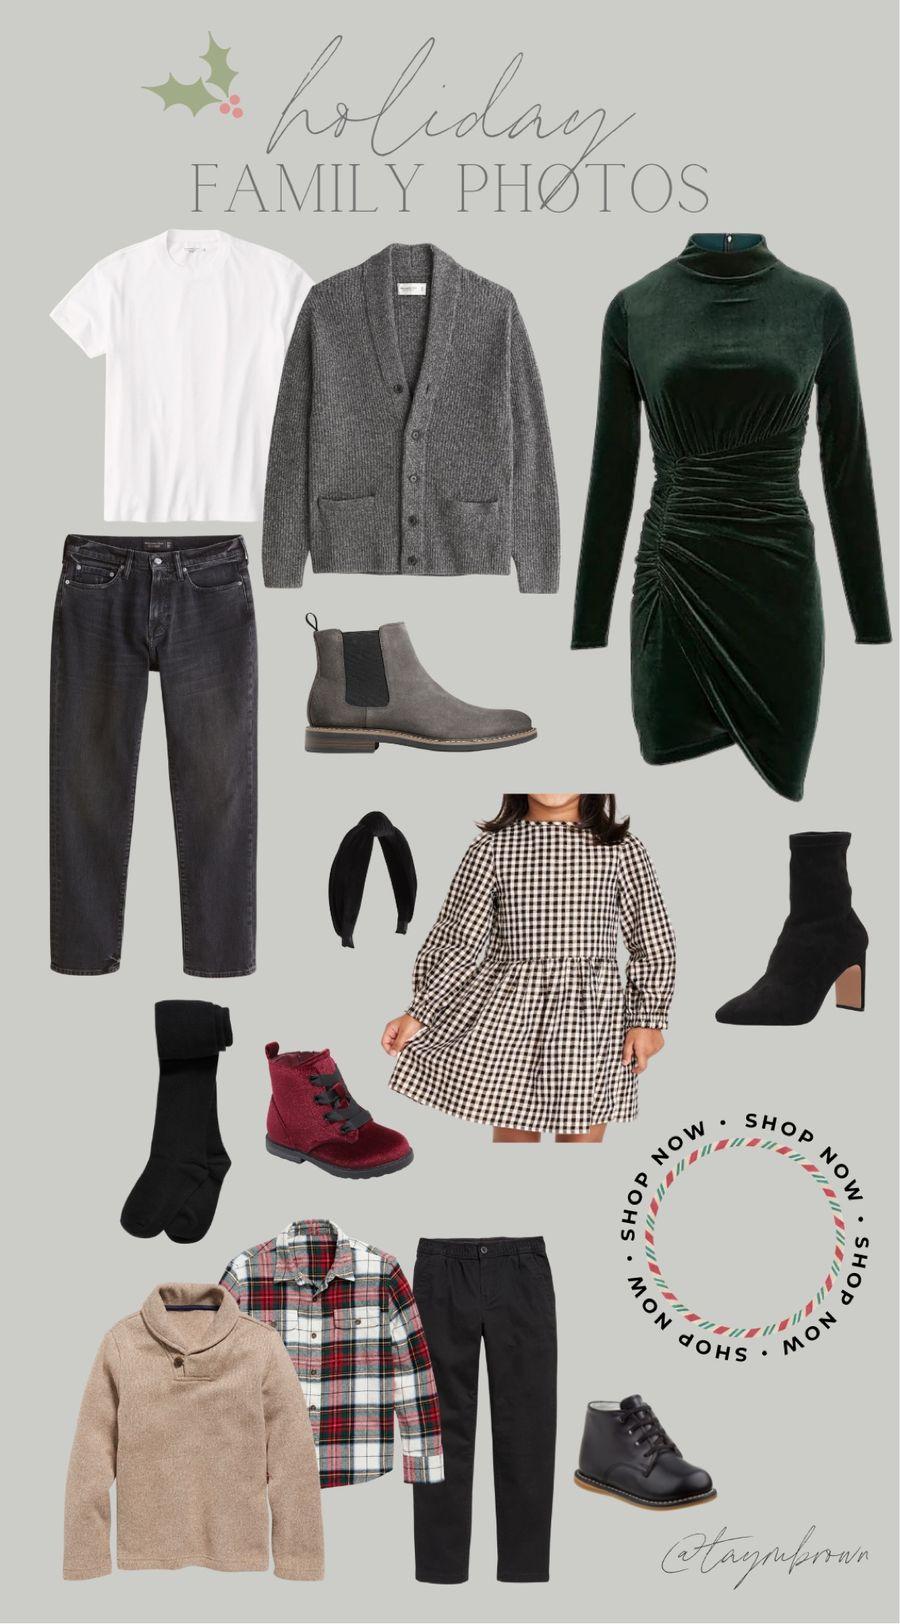 Holiday Family Photo Outfit Ideas - The Styled Press